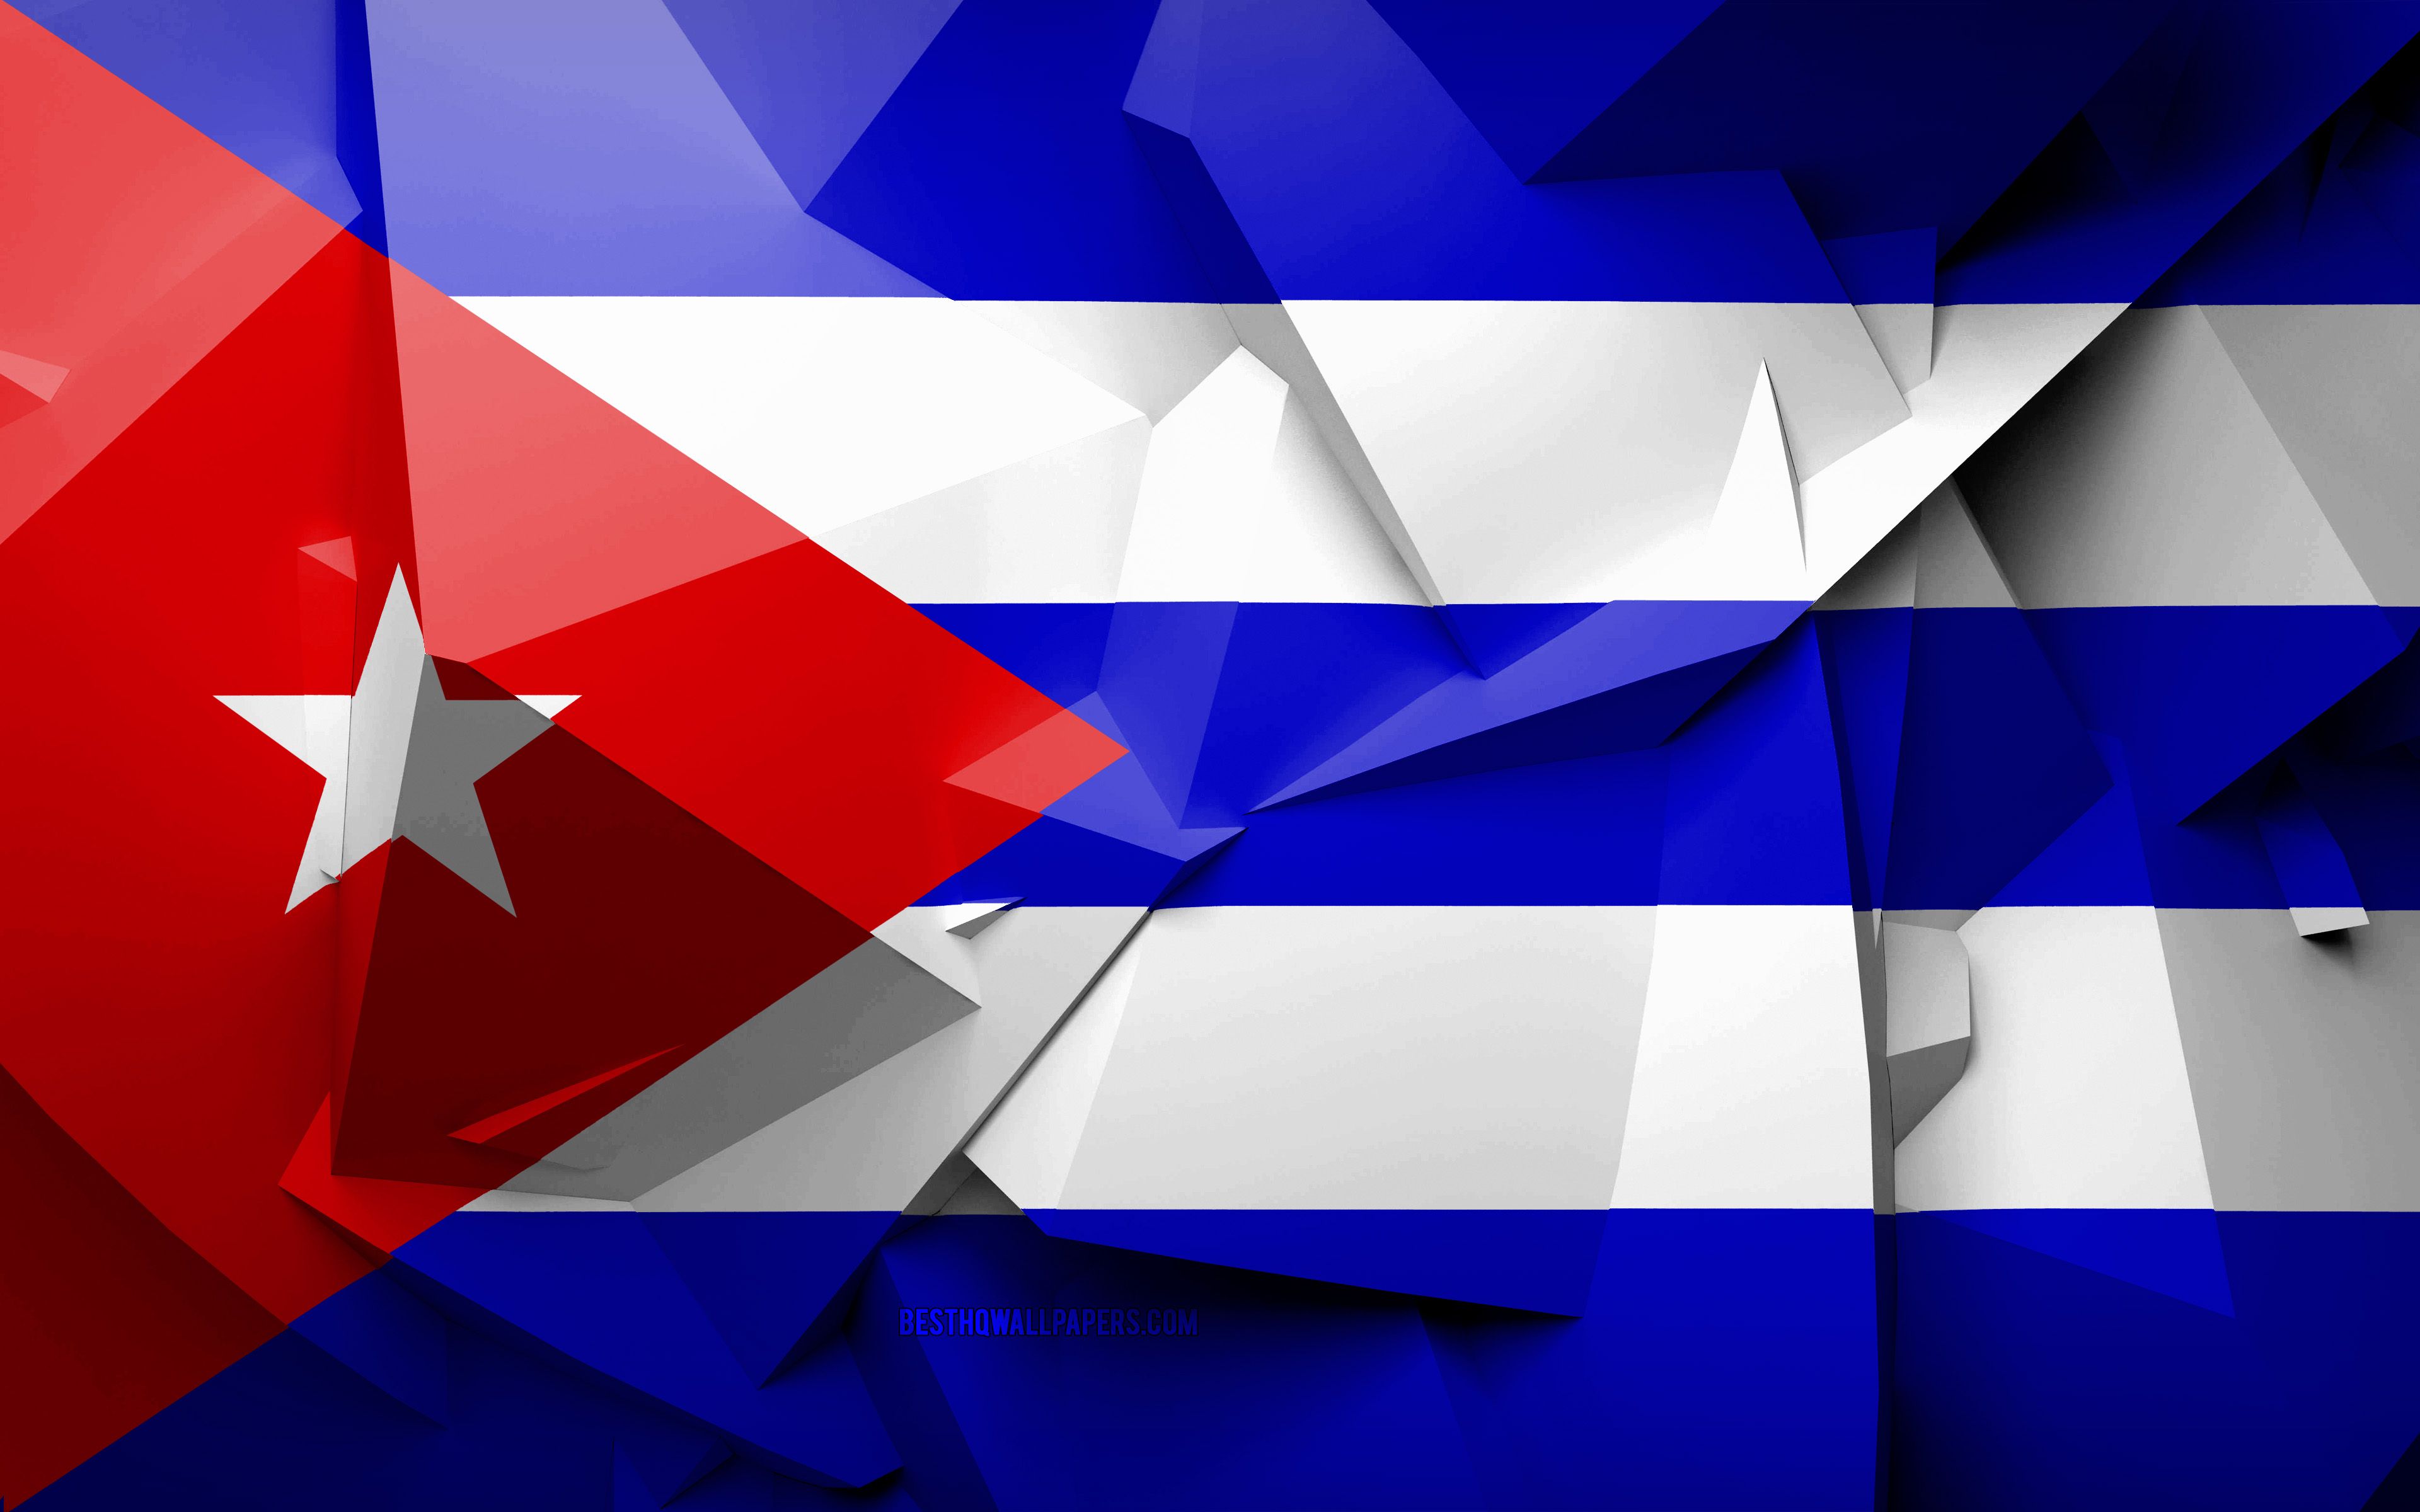 Download wallpaper 4k, Flag of Cuba, geometric art, North American countries, Cuban flag, creative, Cuba, North America, Cuba 3D flag, national symbols for desktop with resolution 3840x2400. High Quality HD picture wallpaper